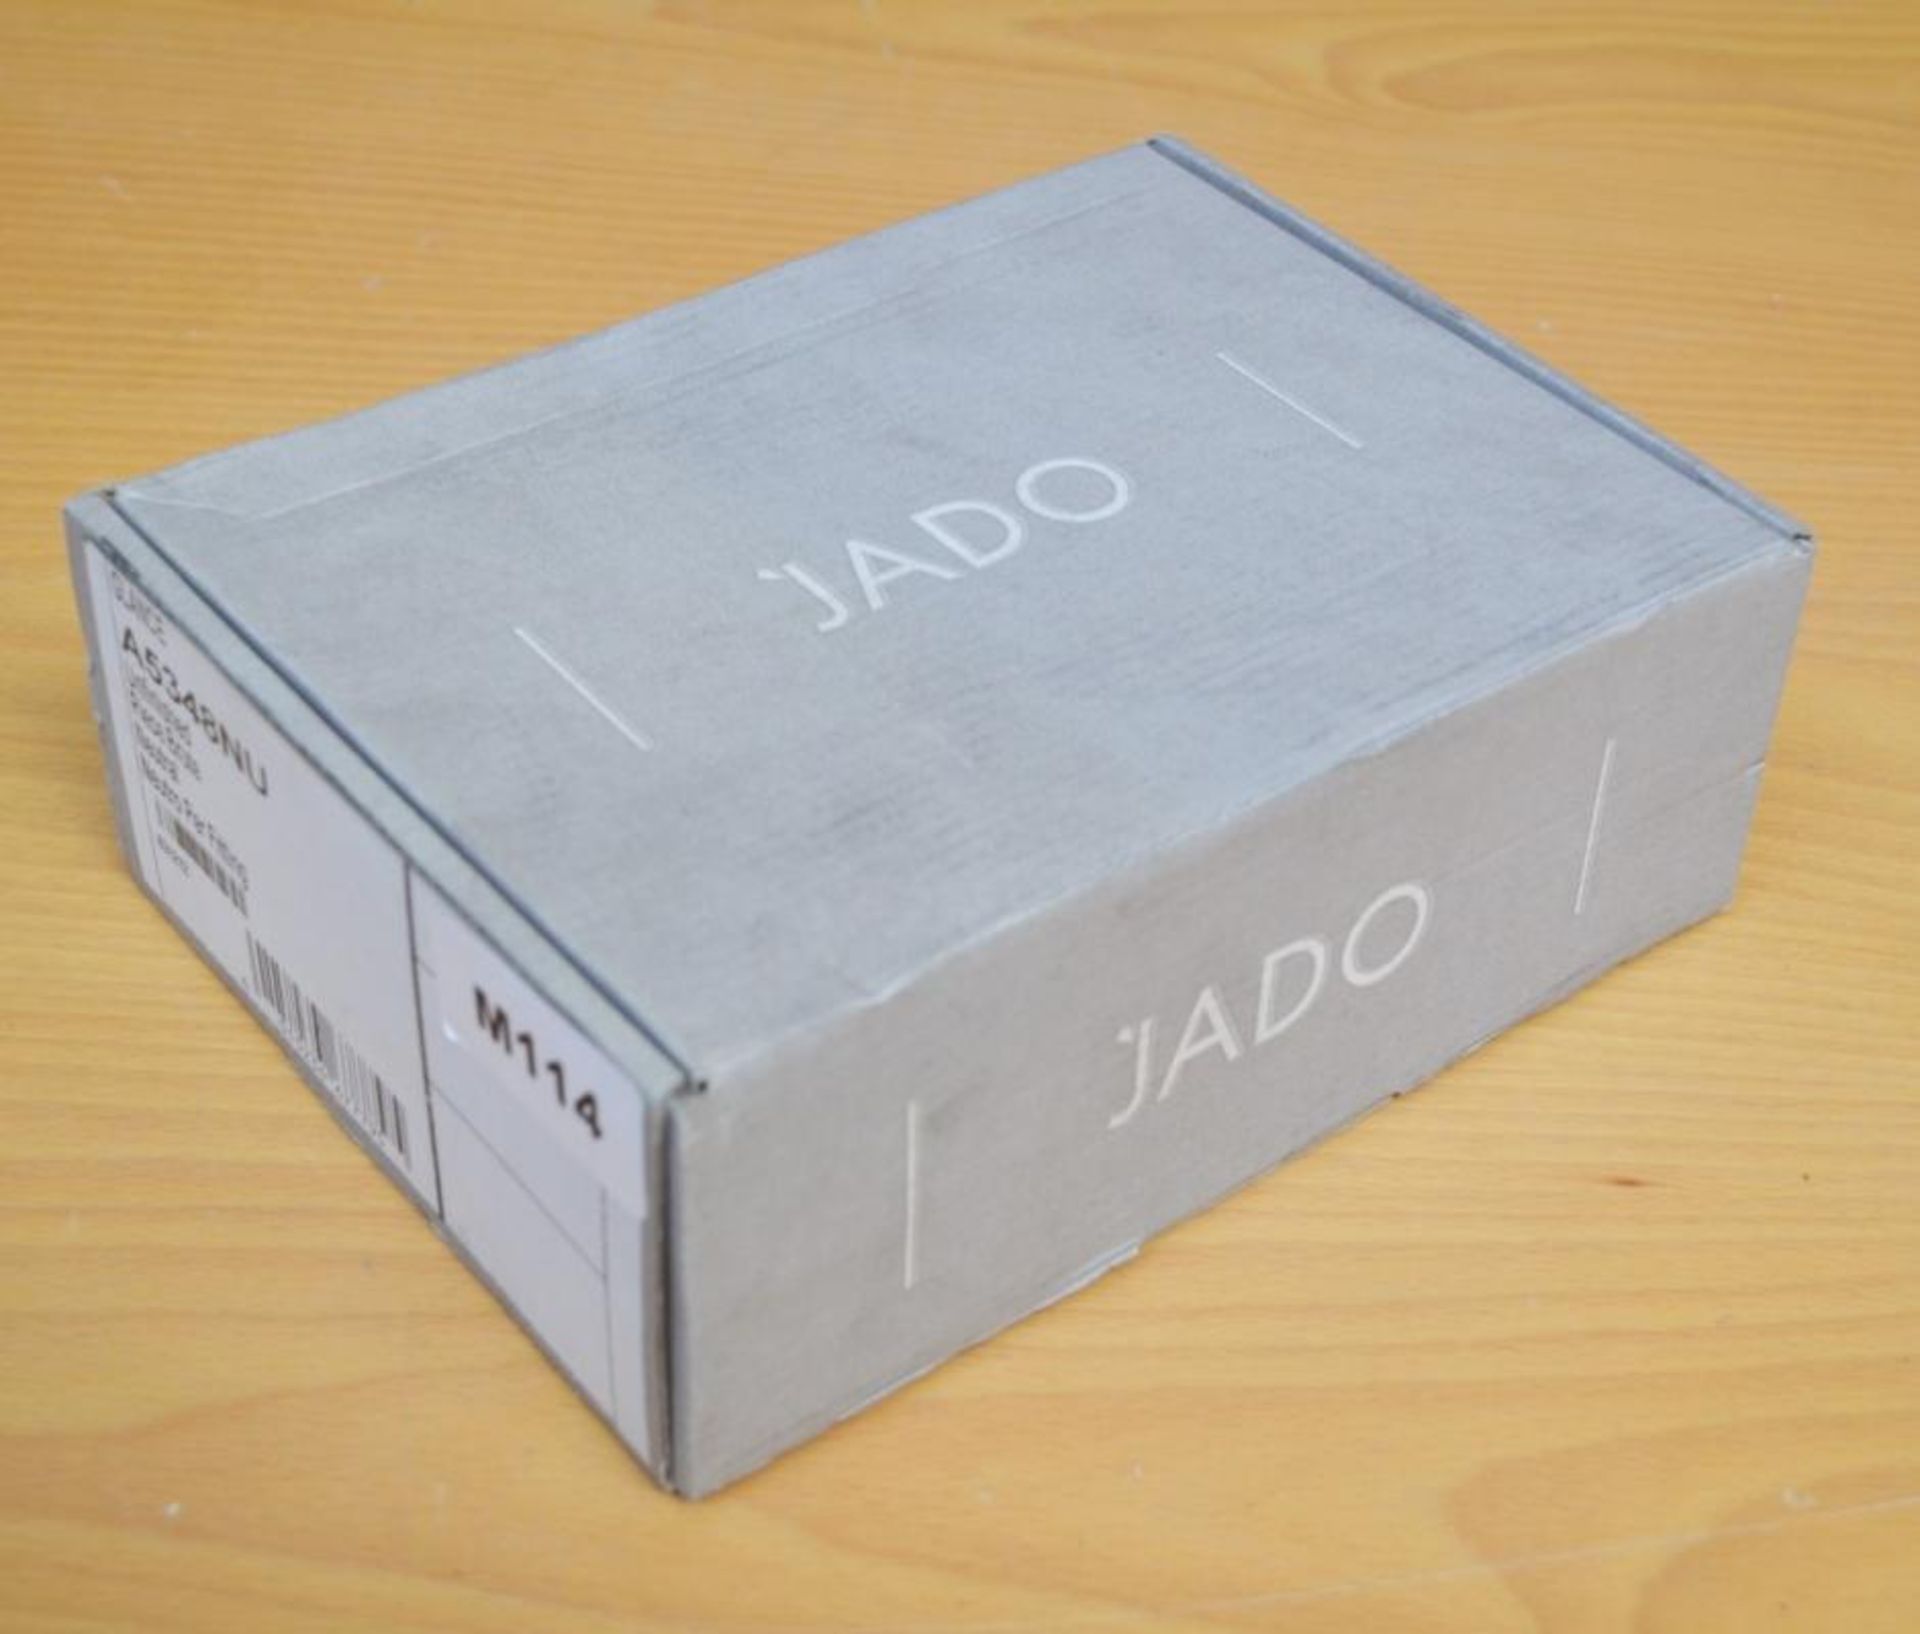 1 x Ideal Standard JADO "Glance" Concealed Parts (A5348NU) - Chrome Finish - New / Unused Boxed Stoc - Image 7 of 8